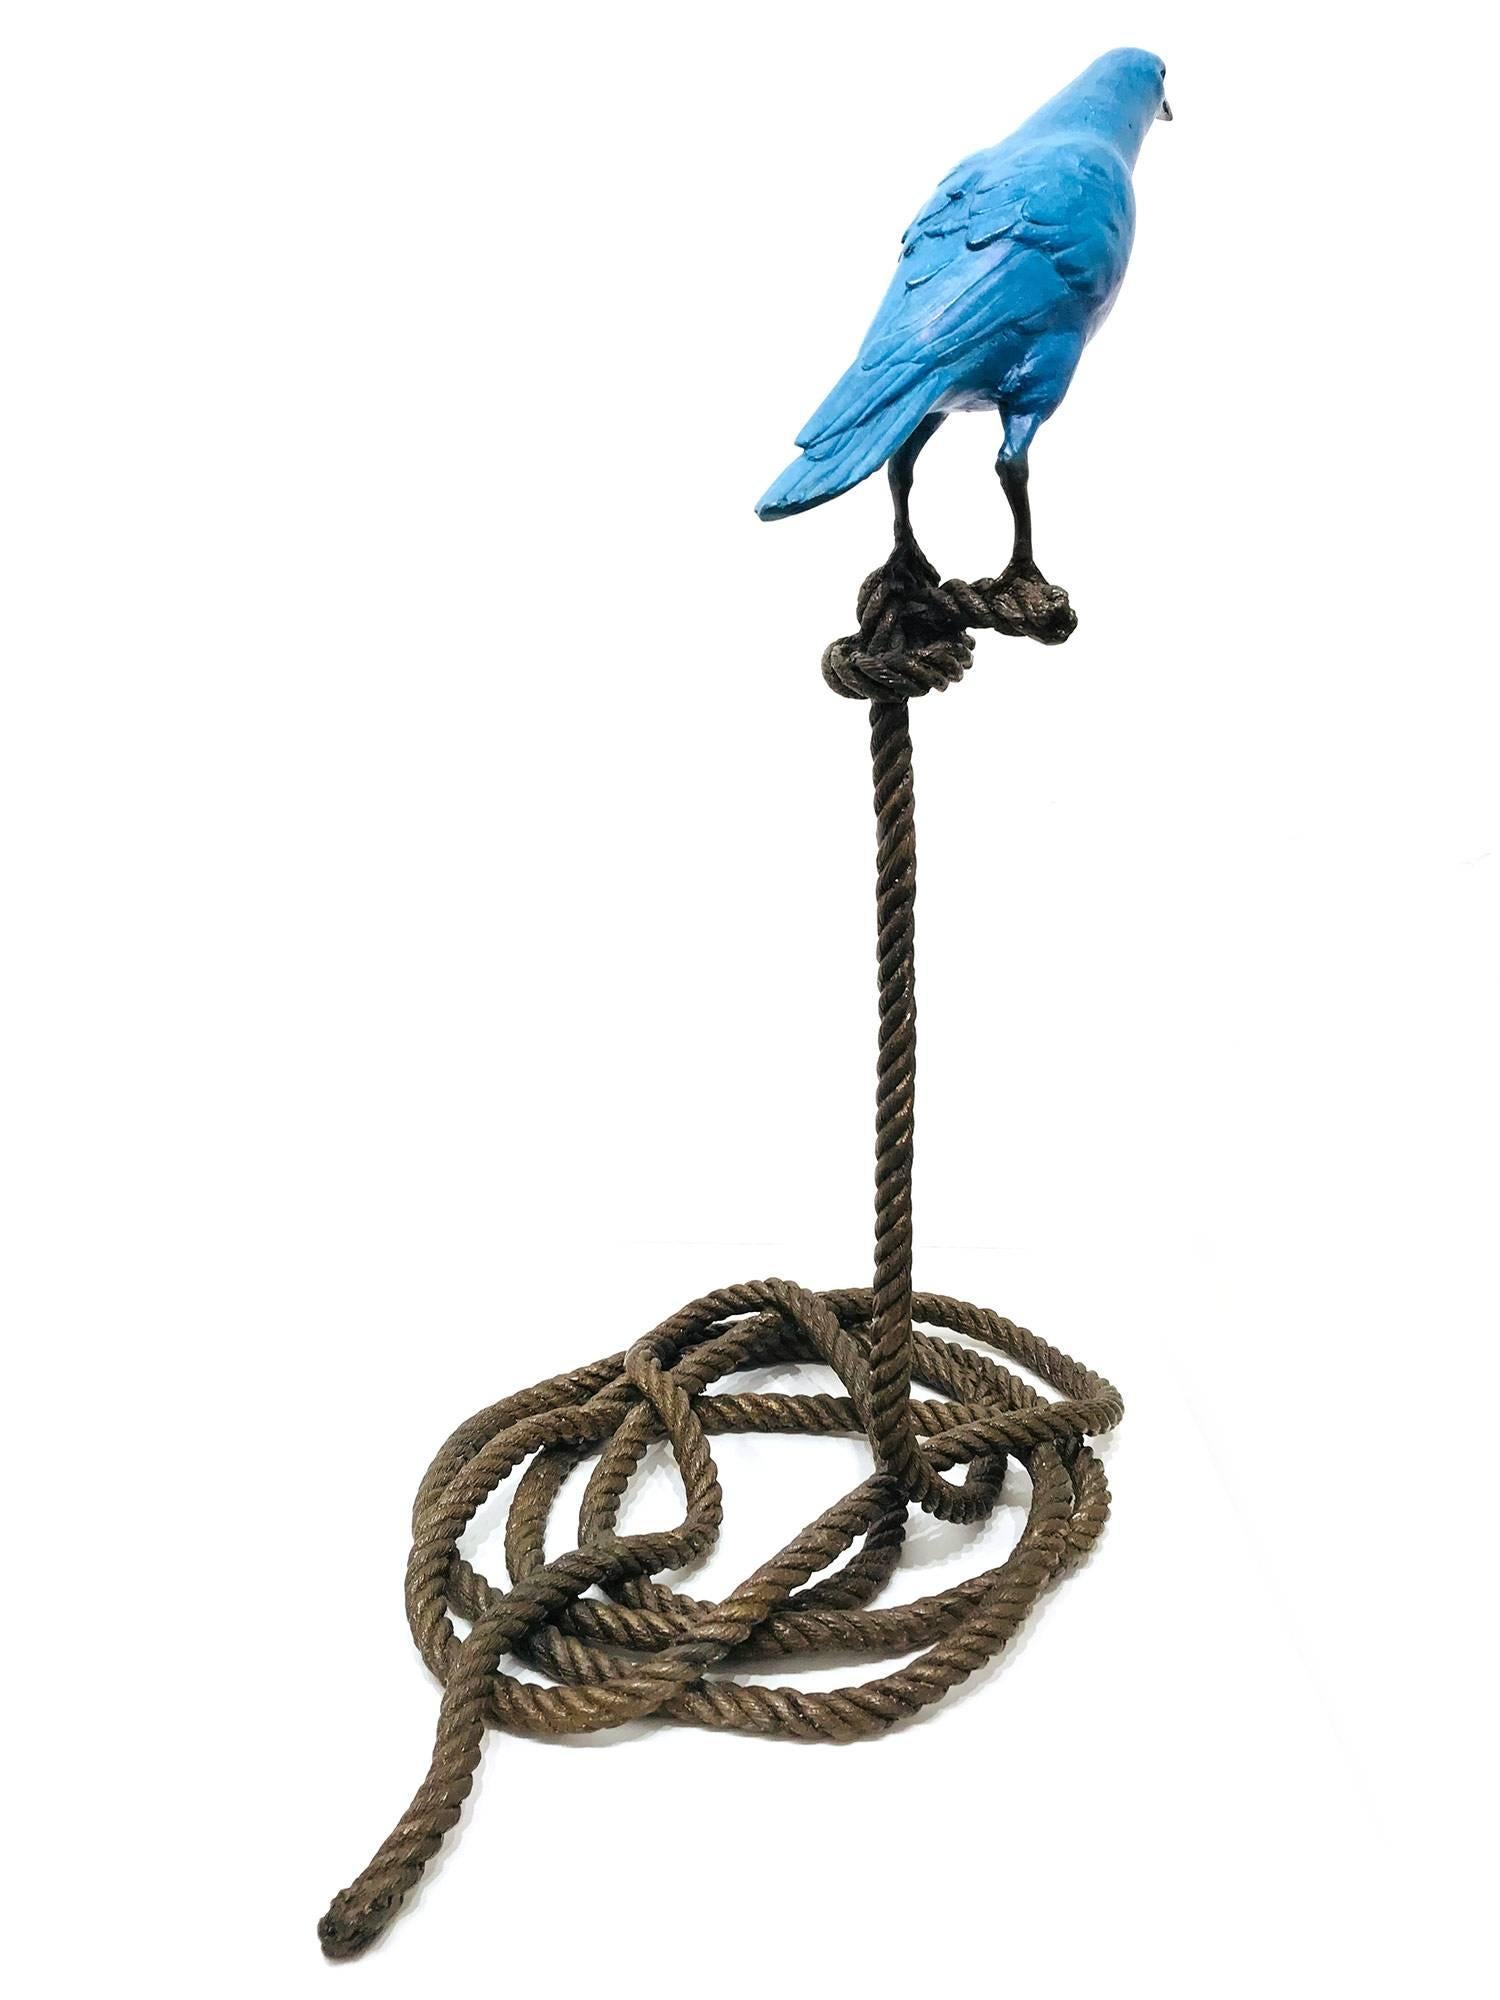 A wonderful yet very playful piece depicting Sebastian, a magpie standing on a short rope from Gillie and Marc's collection which explores all the interesting, complex characteristics of the magpie. Here we find this very dynamic piece as the bird